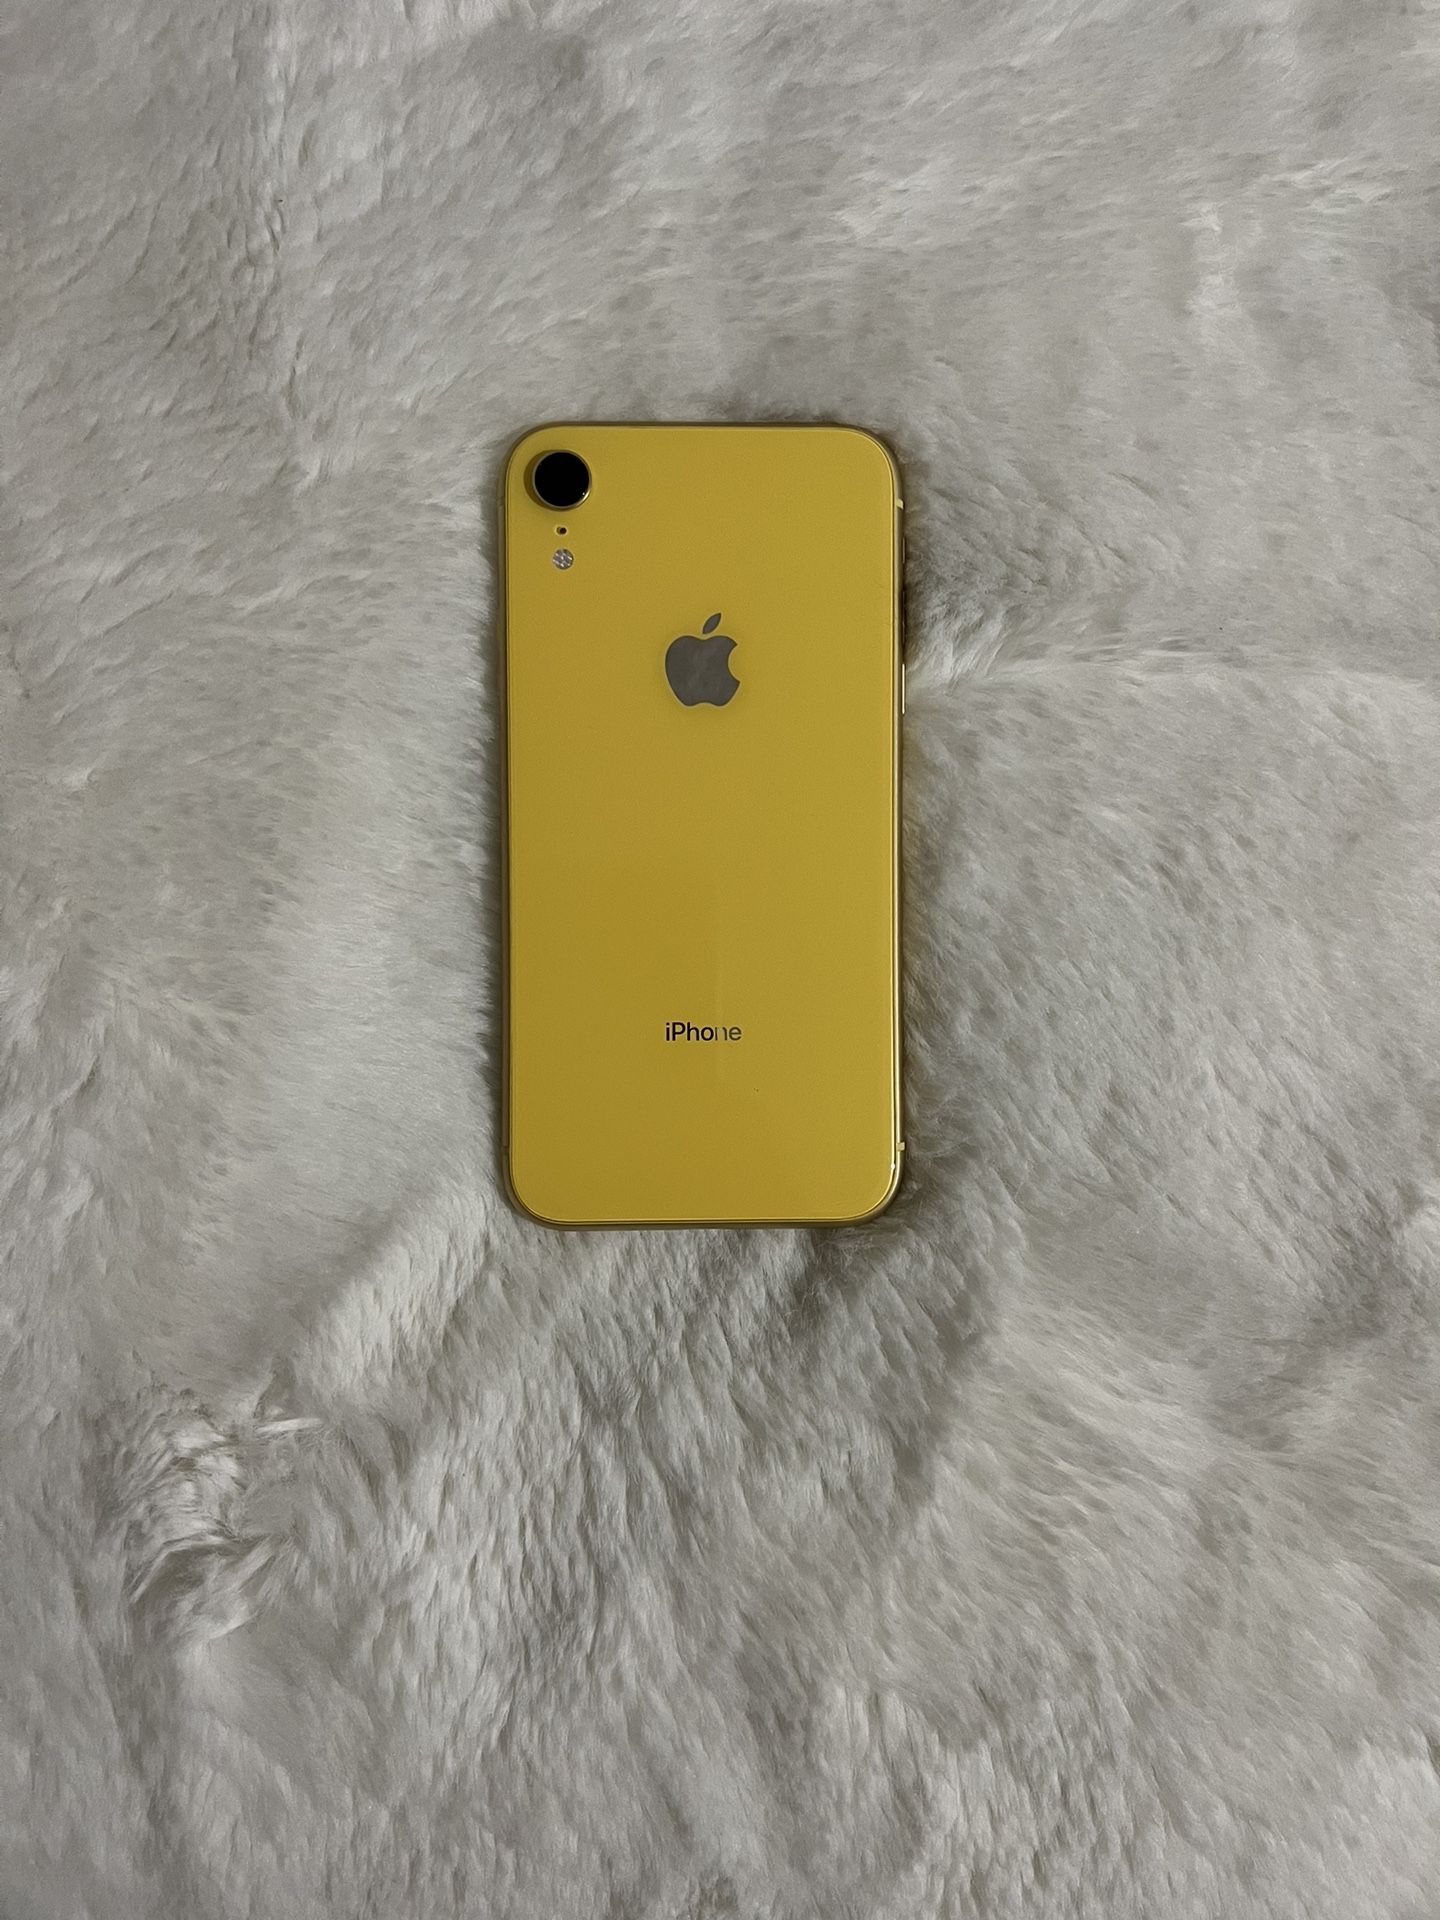 Iphone XR for Sale in Fort Myers, FL - OfferUp